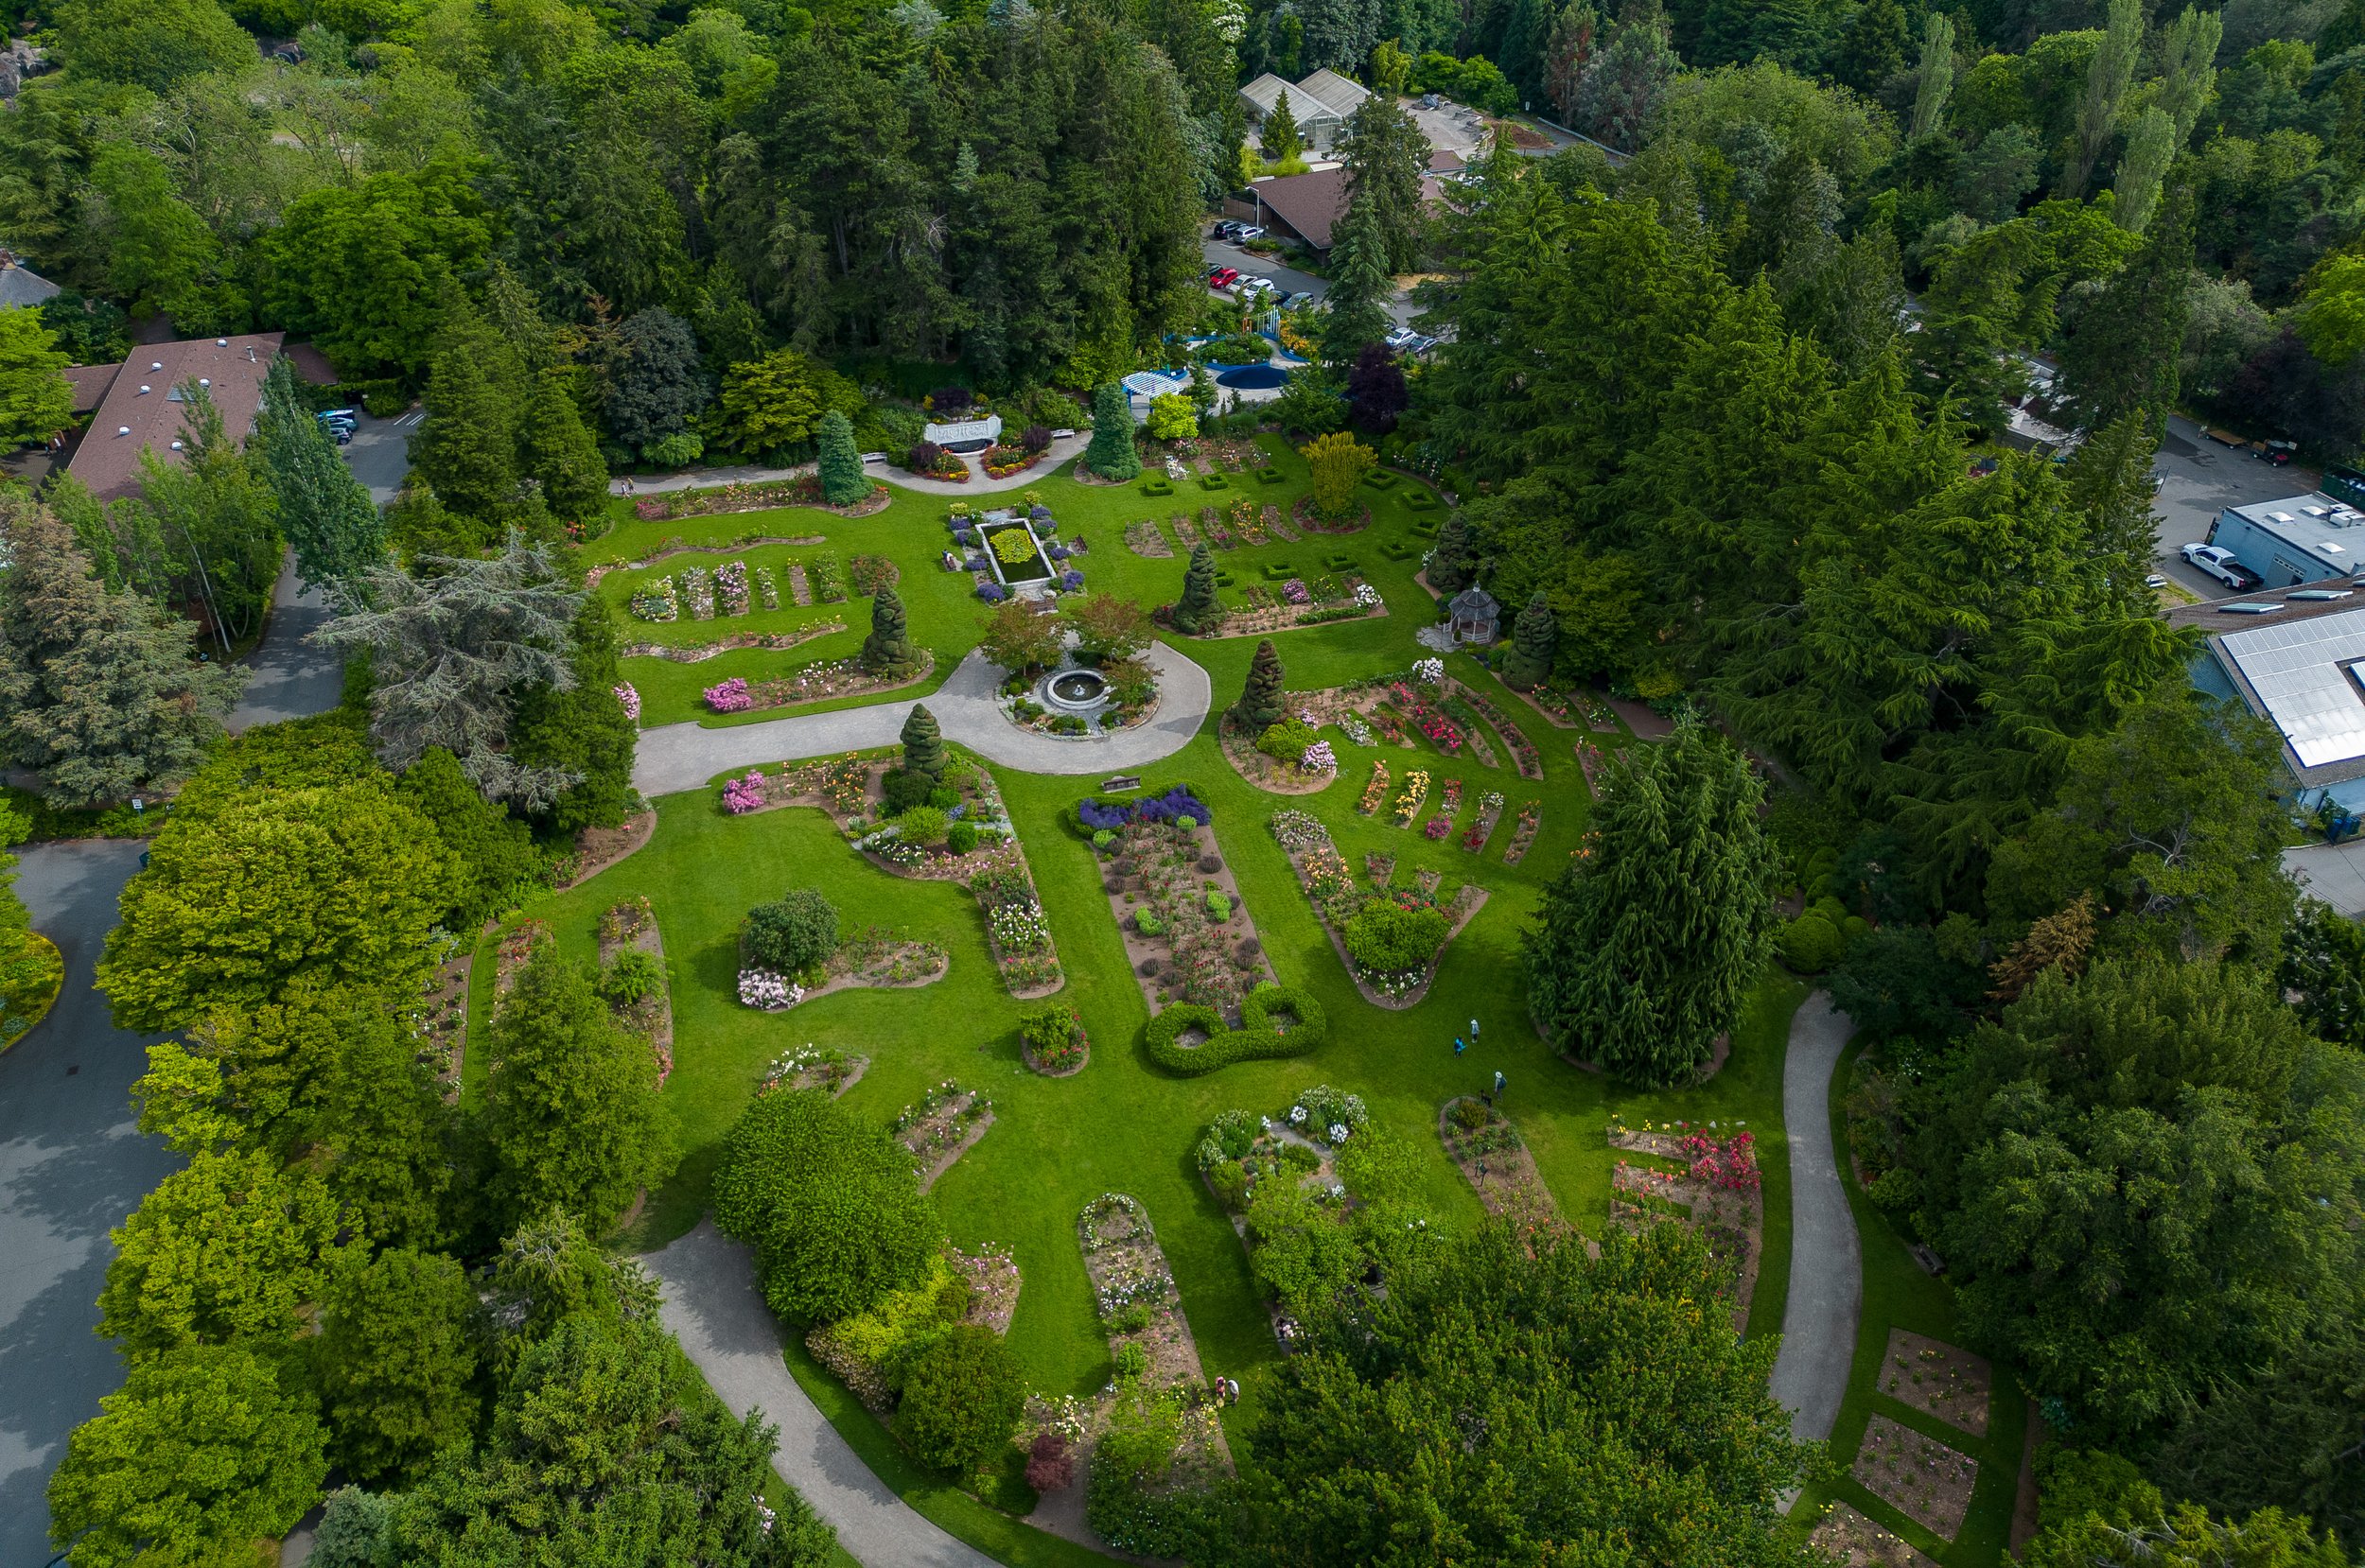  An aerial view of the rose garden near our house 